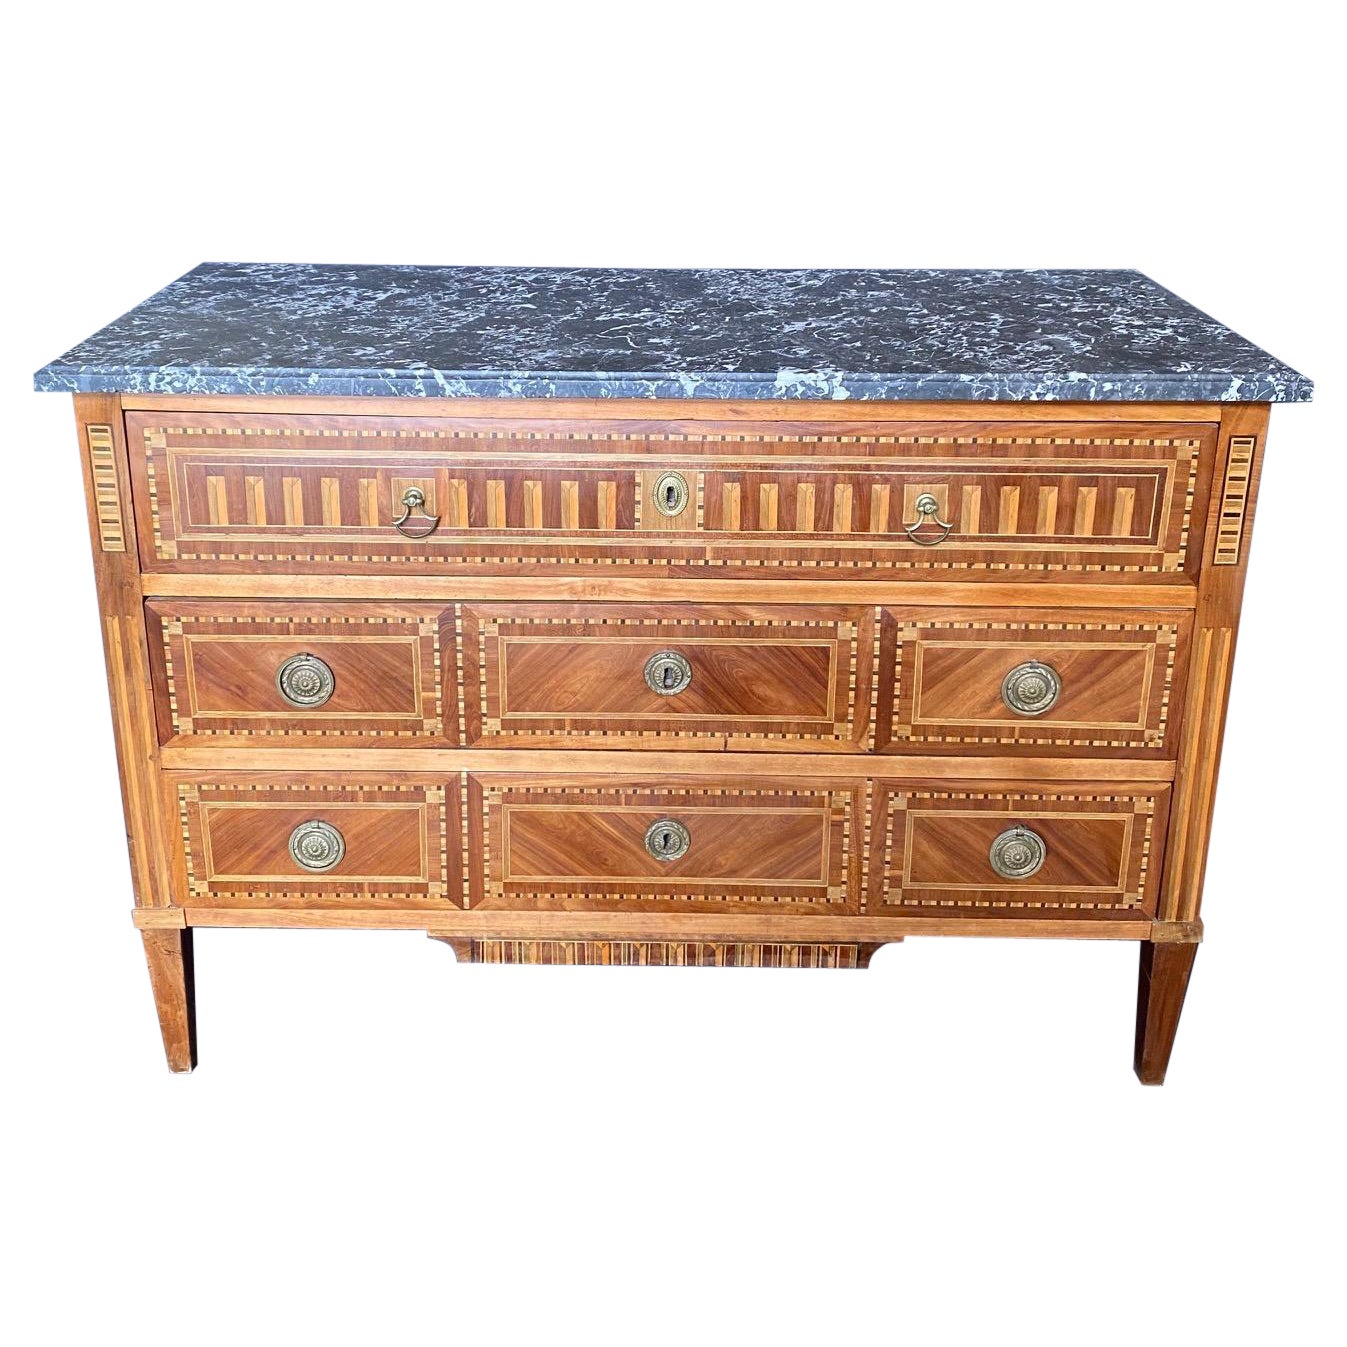 Late 18th Century French Neoclassical Louis XVI Inlaid Walnut Marble Top Commode For Sale